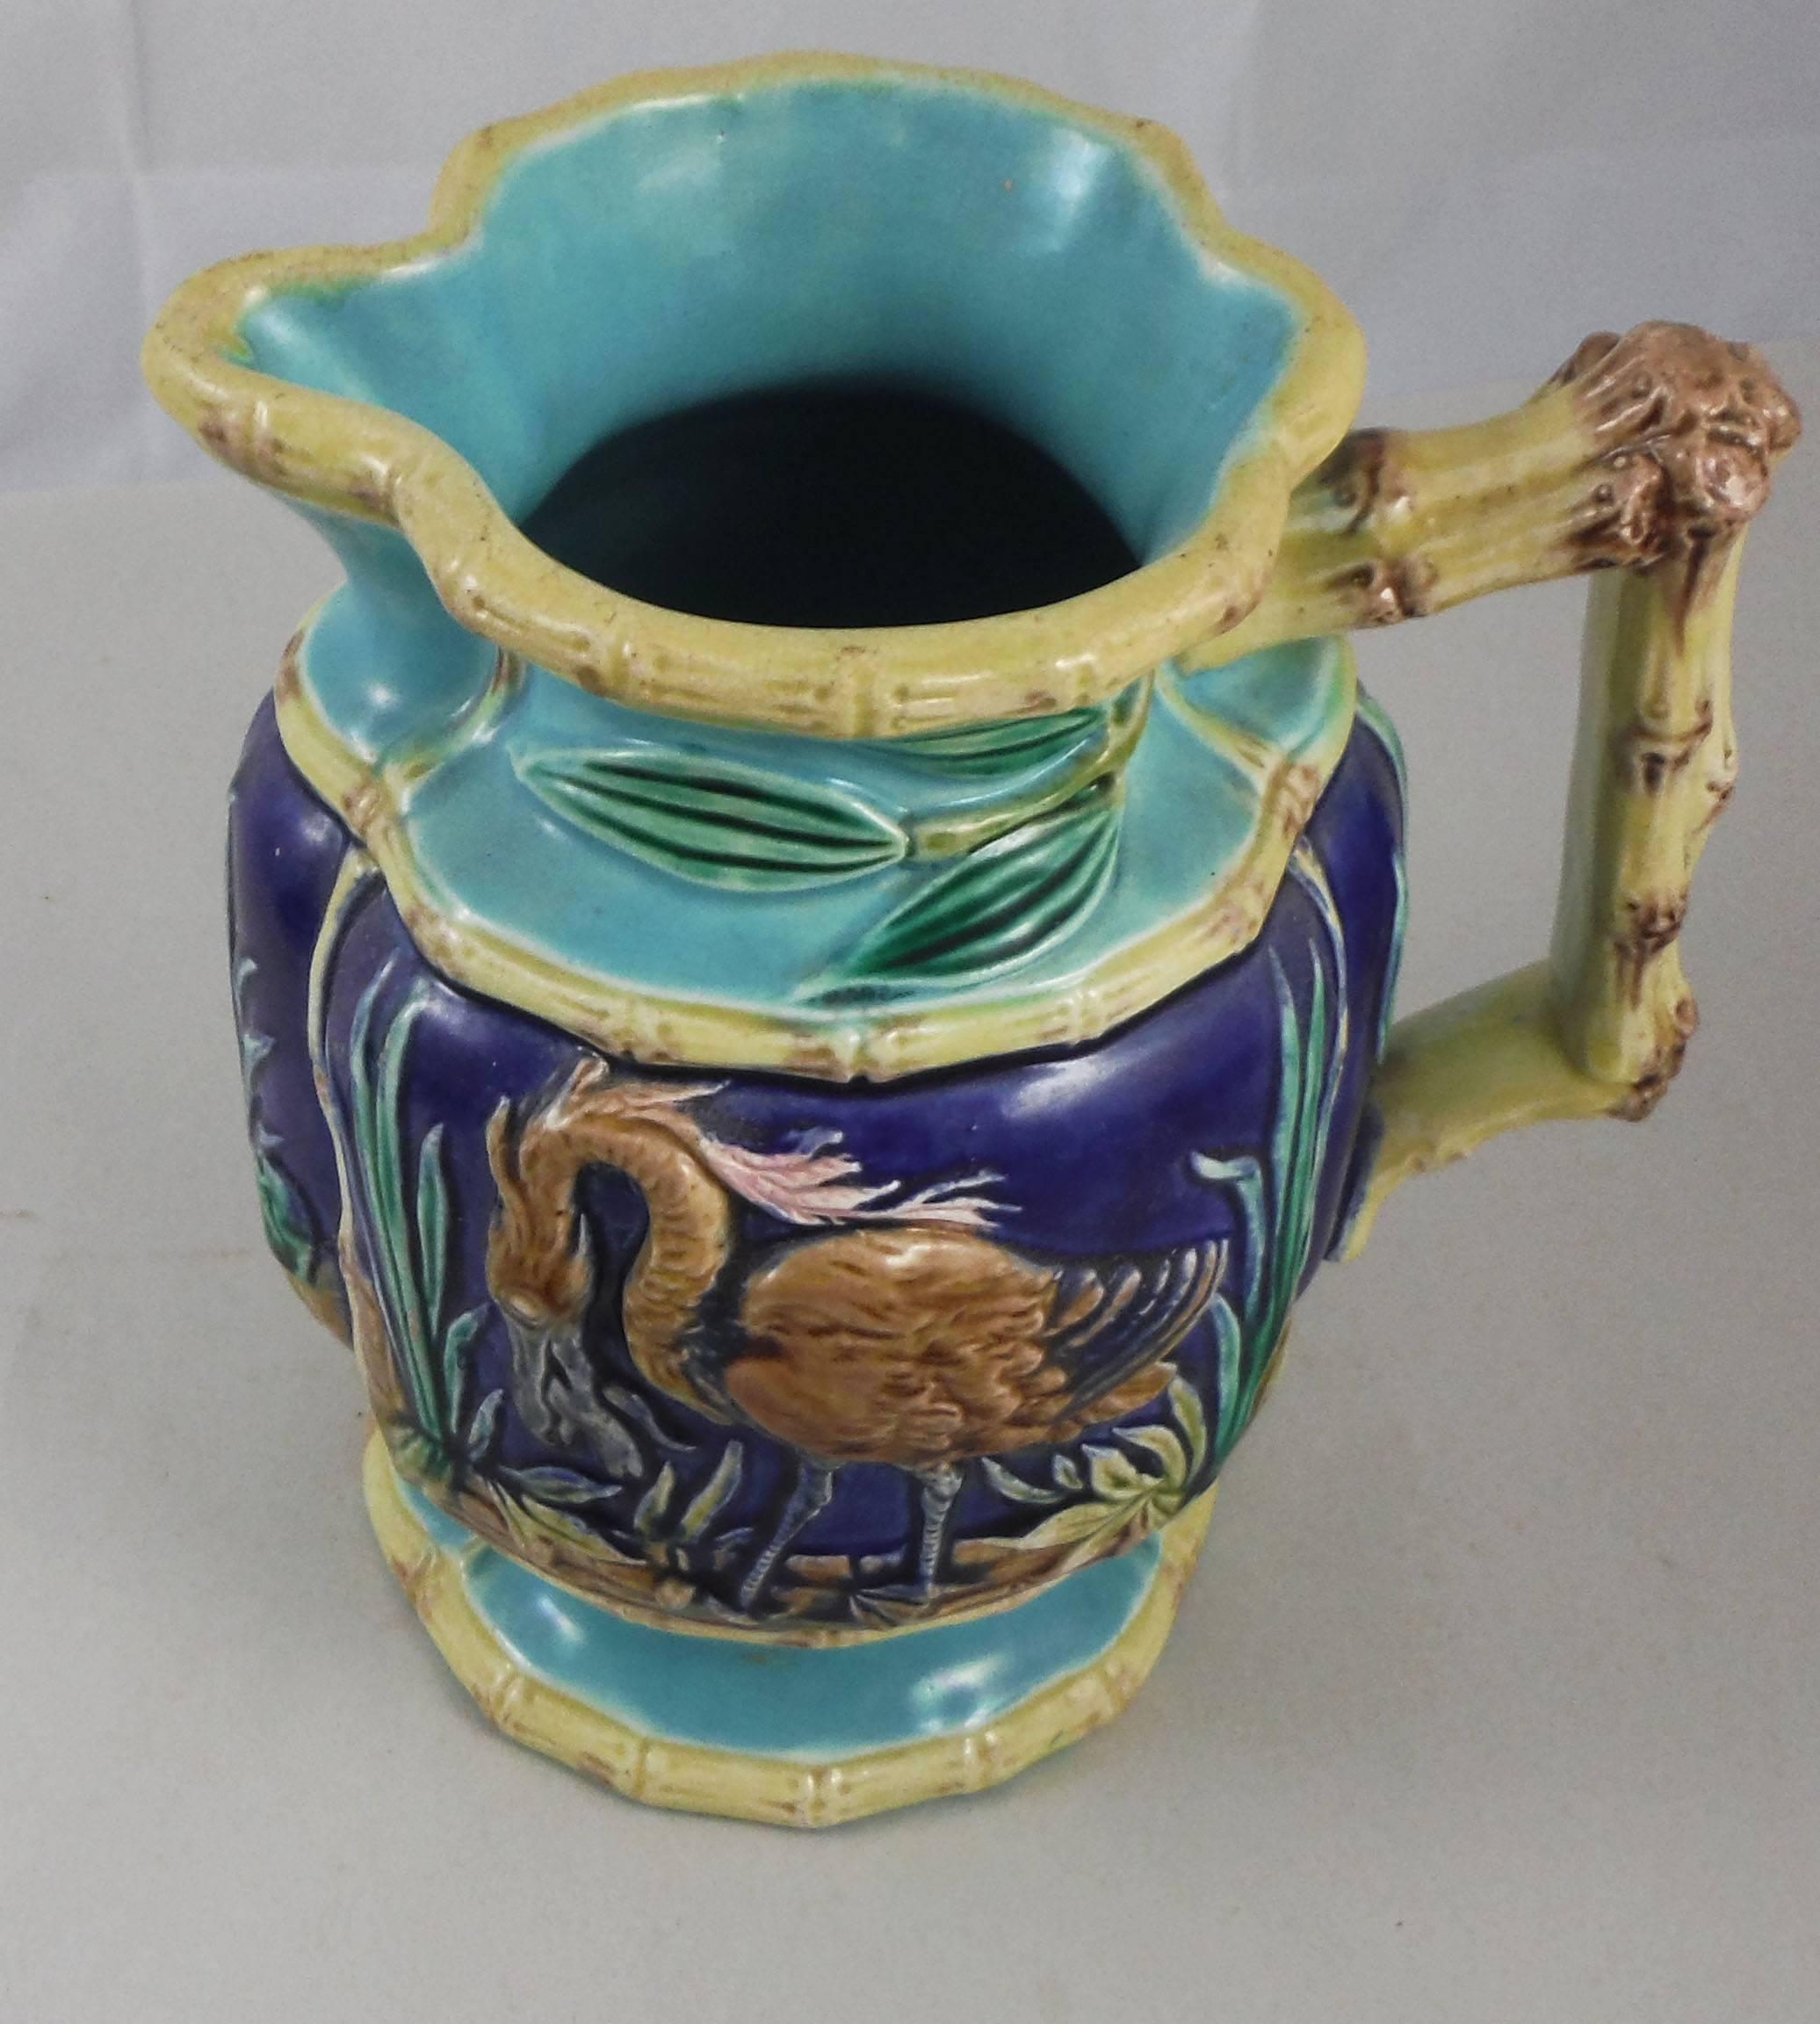 19th century English Majolica pitcher with birds on a cobalt background surrounded by bamboo, it's an harmonious composition of the colors between the yellow of the bamboo, the aqua turquoise and the cobalt blue.
This pitcher is attributed to